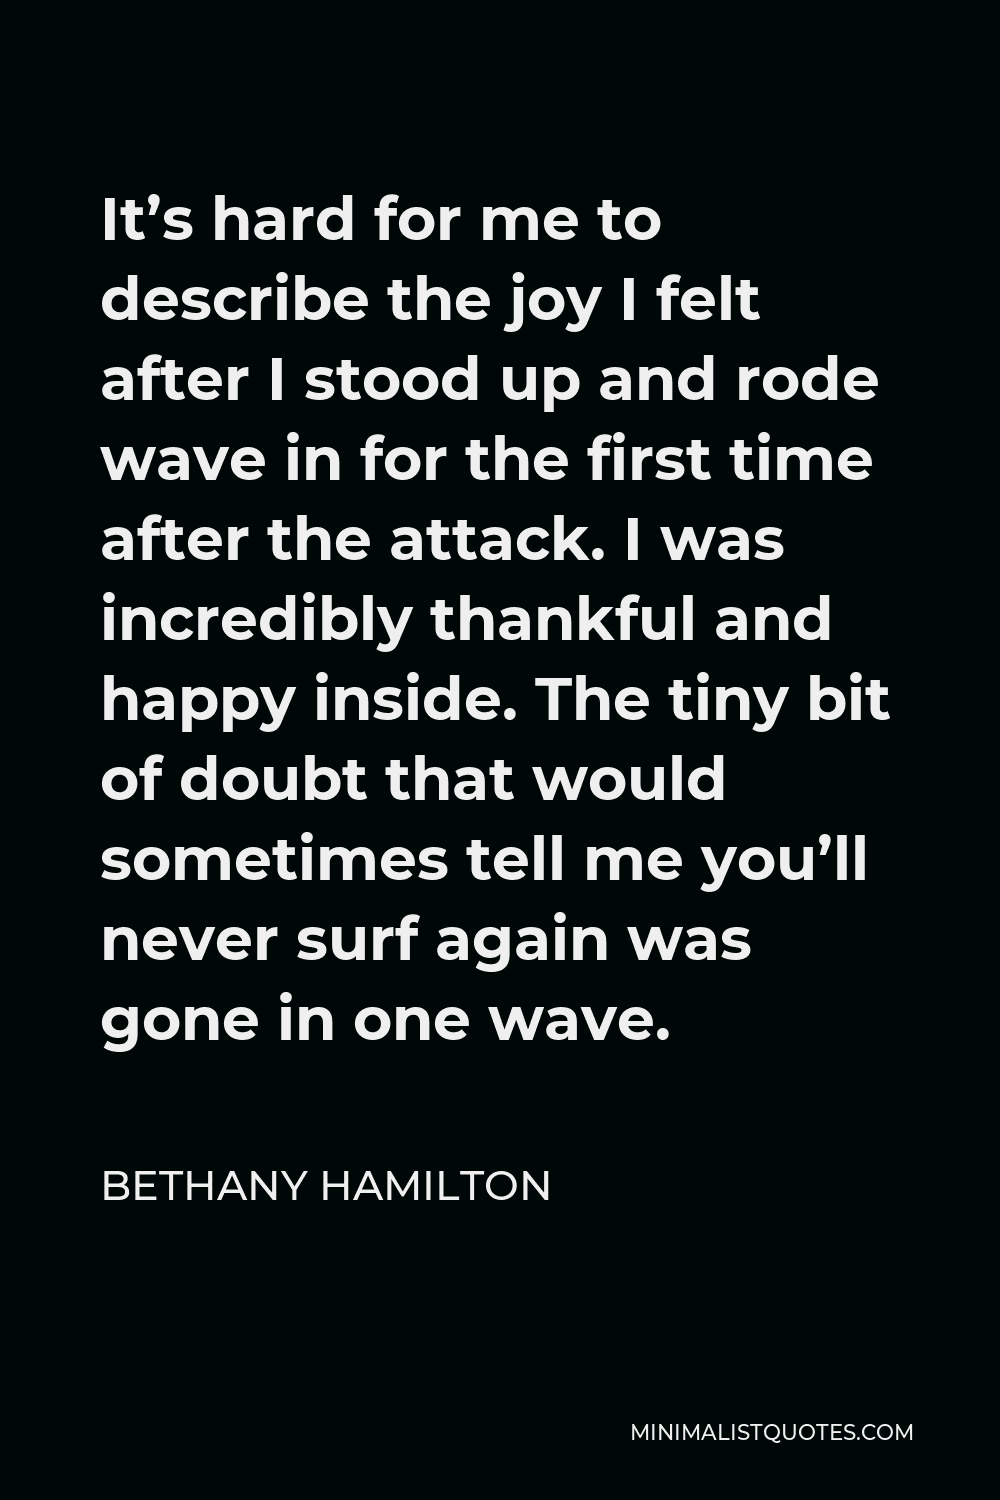 Bethany Hamilton Quote - It’s hard for me to describe the joy I felt after I stood up and rode wave in for the first time after the attack. I was incredibly thankful and happy inside. The tiny bit of doubt that would sometimes tell me you’ll never surf again was gone in one wave.